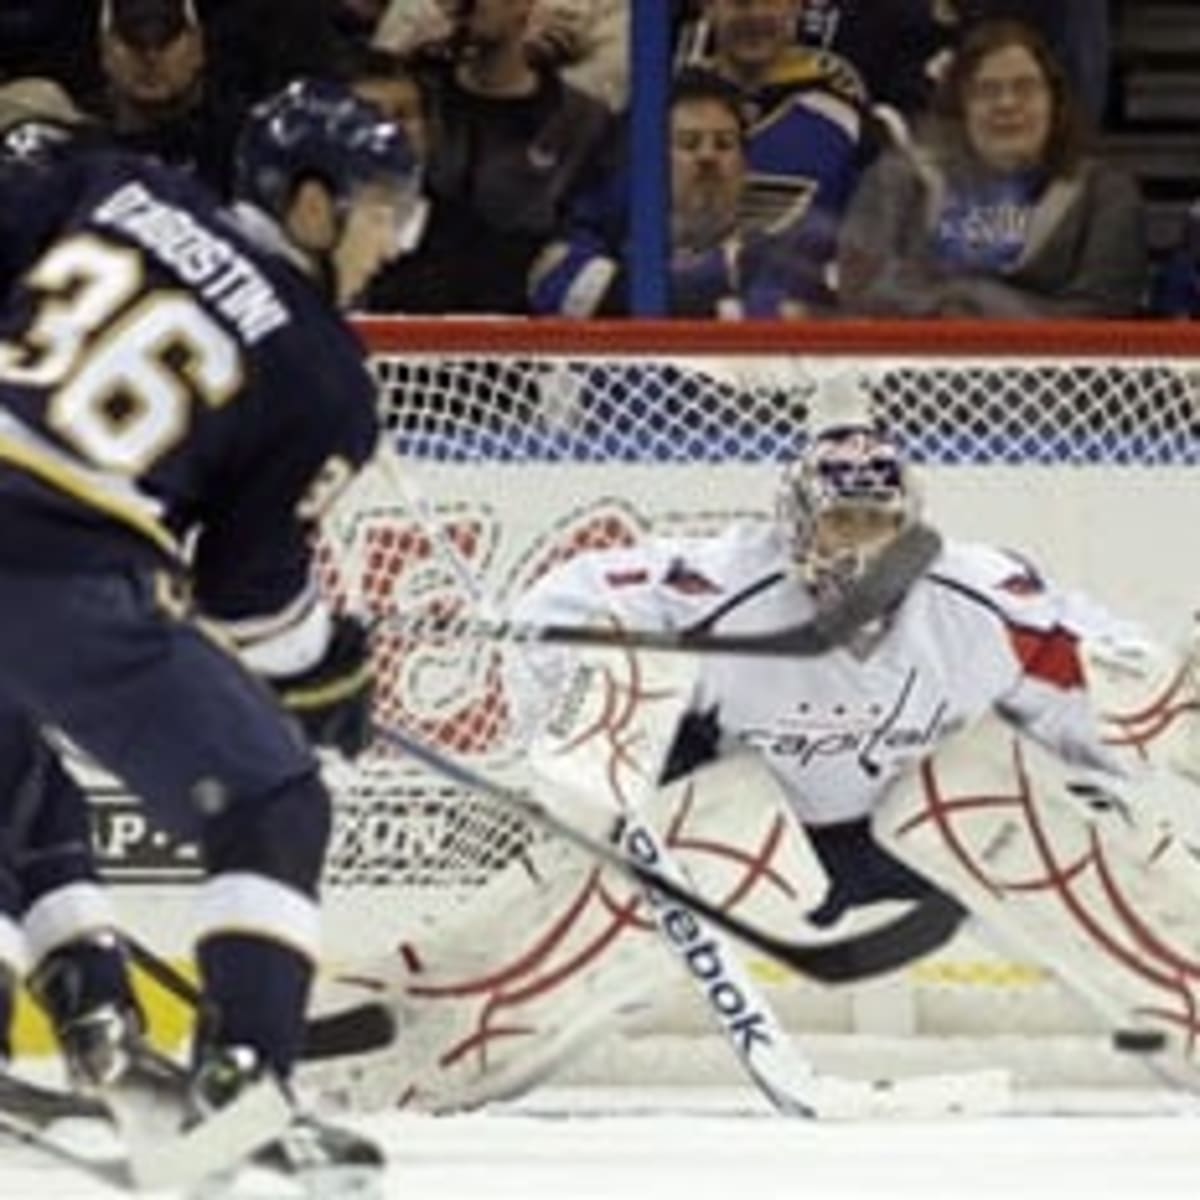 Jaroslav Halak (41) of the St. Louis Blues with a blocker save during the NHL  game between The Columbus Blue Jackets vs The St. Louis Blues at Scott  Trade Center in St.